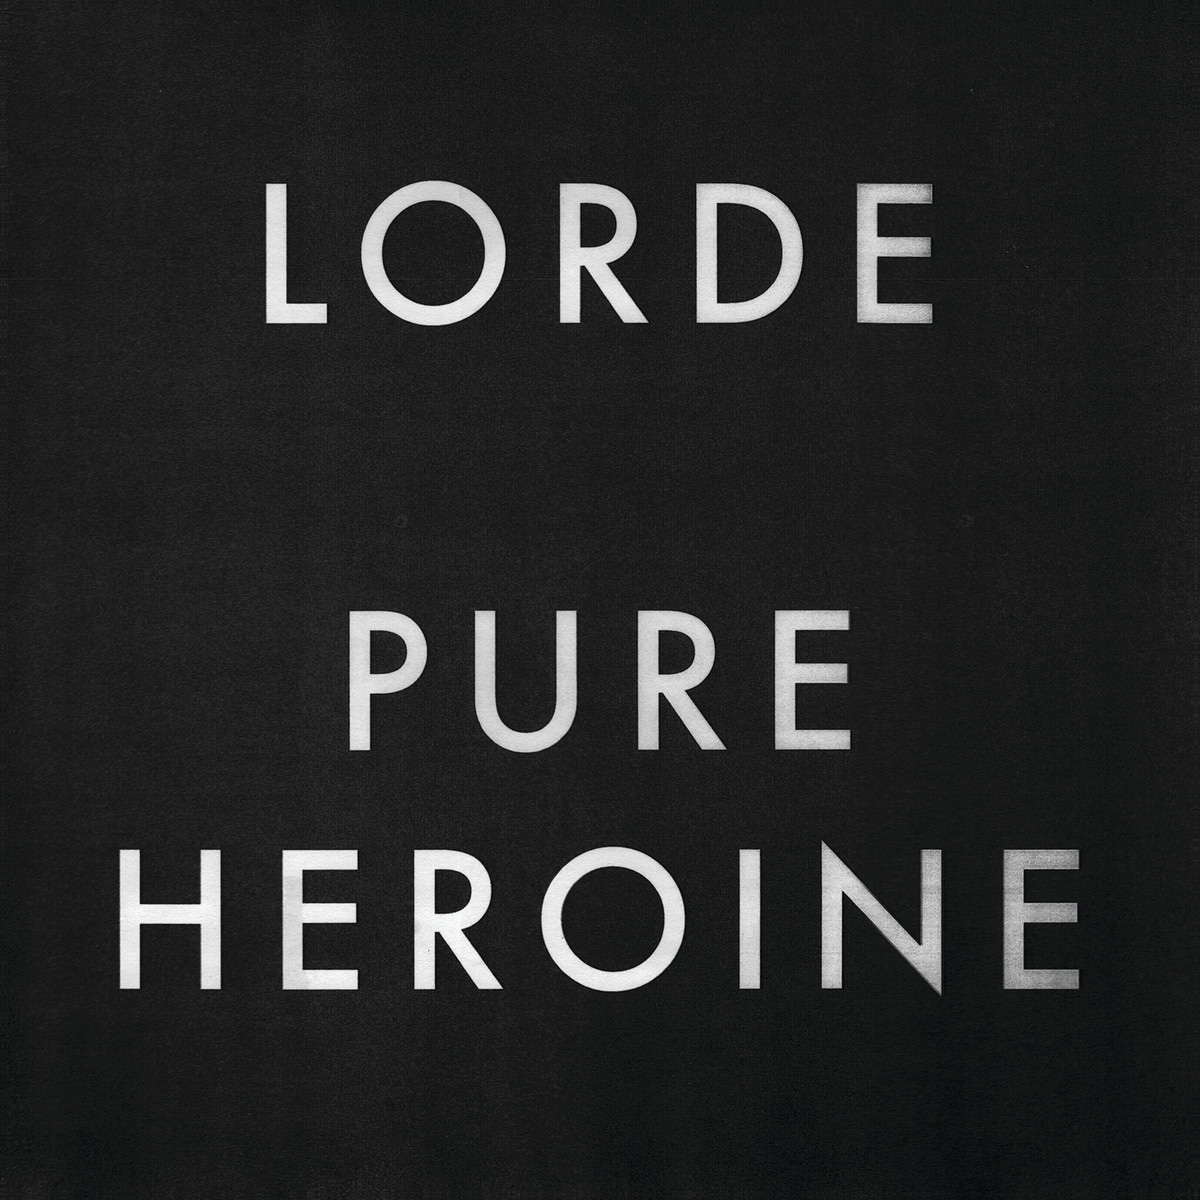  This is the album cover for Lorde’s “Pure Heroine.”
